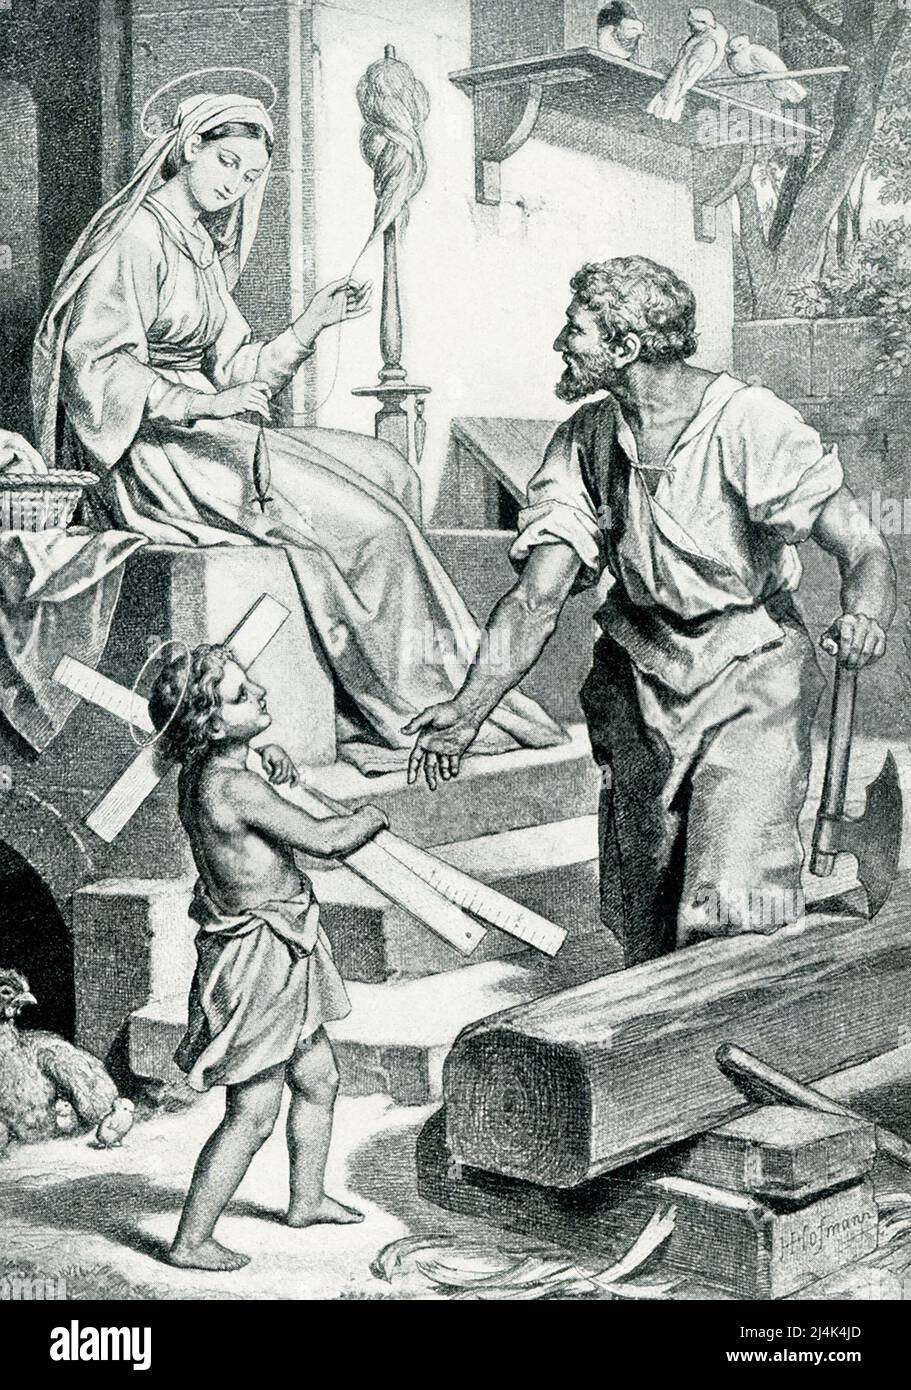 The 1903 caption reads: 'Childhood of Christ from painting by Hoffman 1824.' Jesus is the Greek name for the Hebrew Joshua (savior). Christ is the Greek translation of the Hebrew Messiah (anointed). For Christians, Jesus Christ is the founder of Christianity. This illustration shows Jesus as a young boy working with and helping his father, Joseph. Pictured also is his mother, Mary. Hans Hofmann (died 1966) was a German-born American painter, renowned as both an artist and teacher. His career spanned two generations and two continents, and is considered to have both preceded and influenced Abst Stock Photo